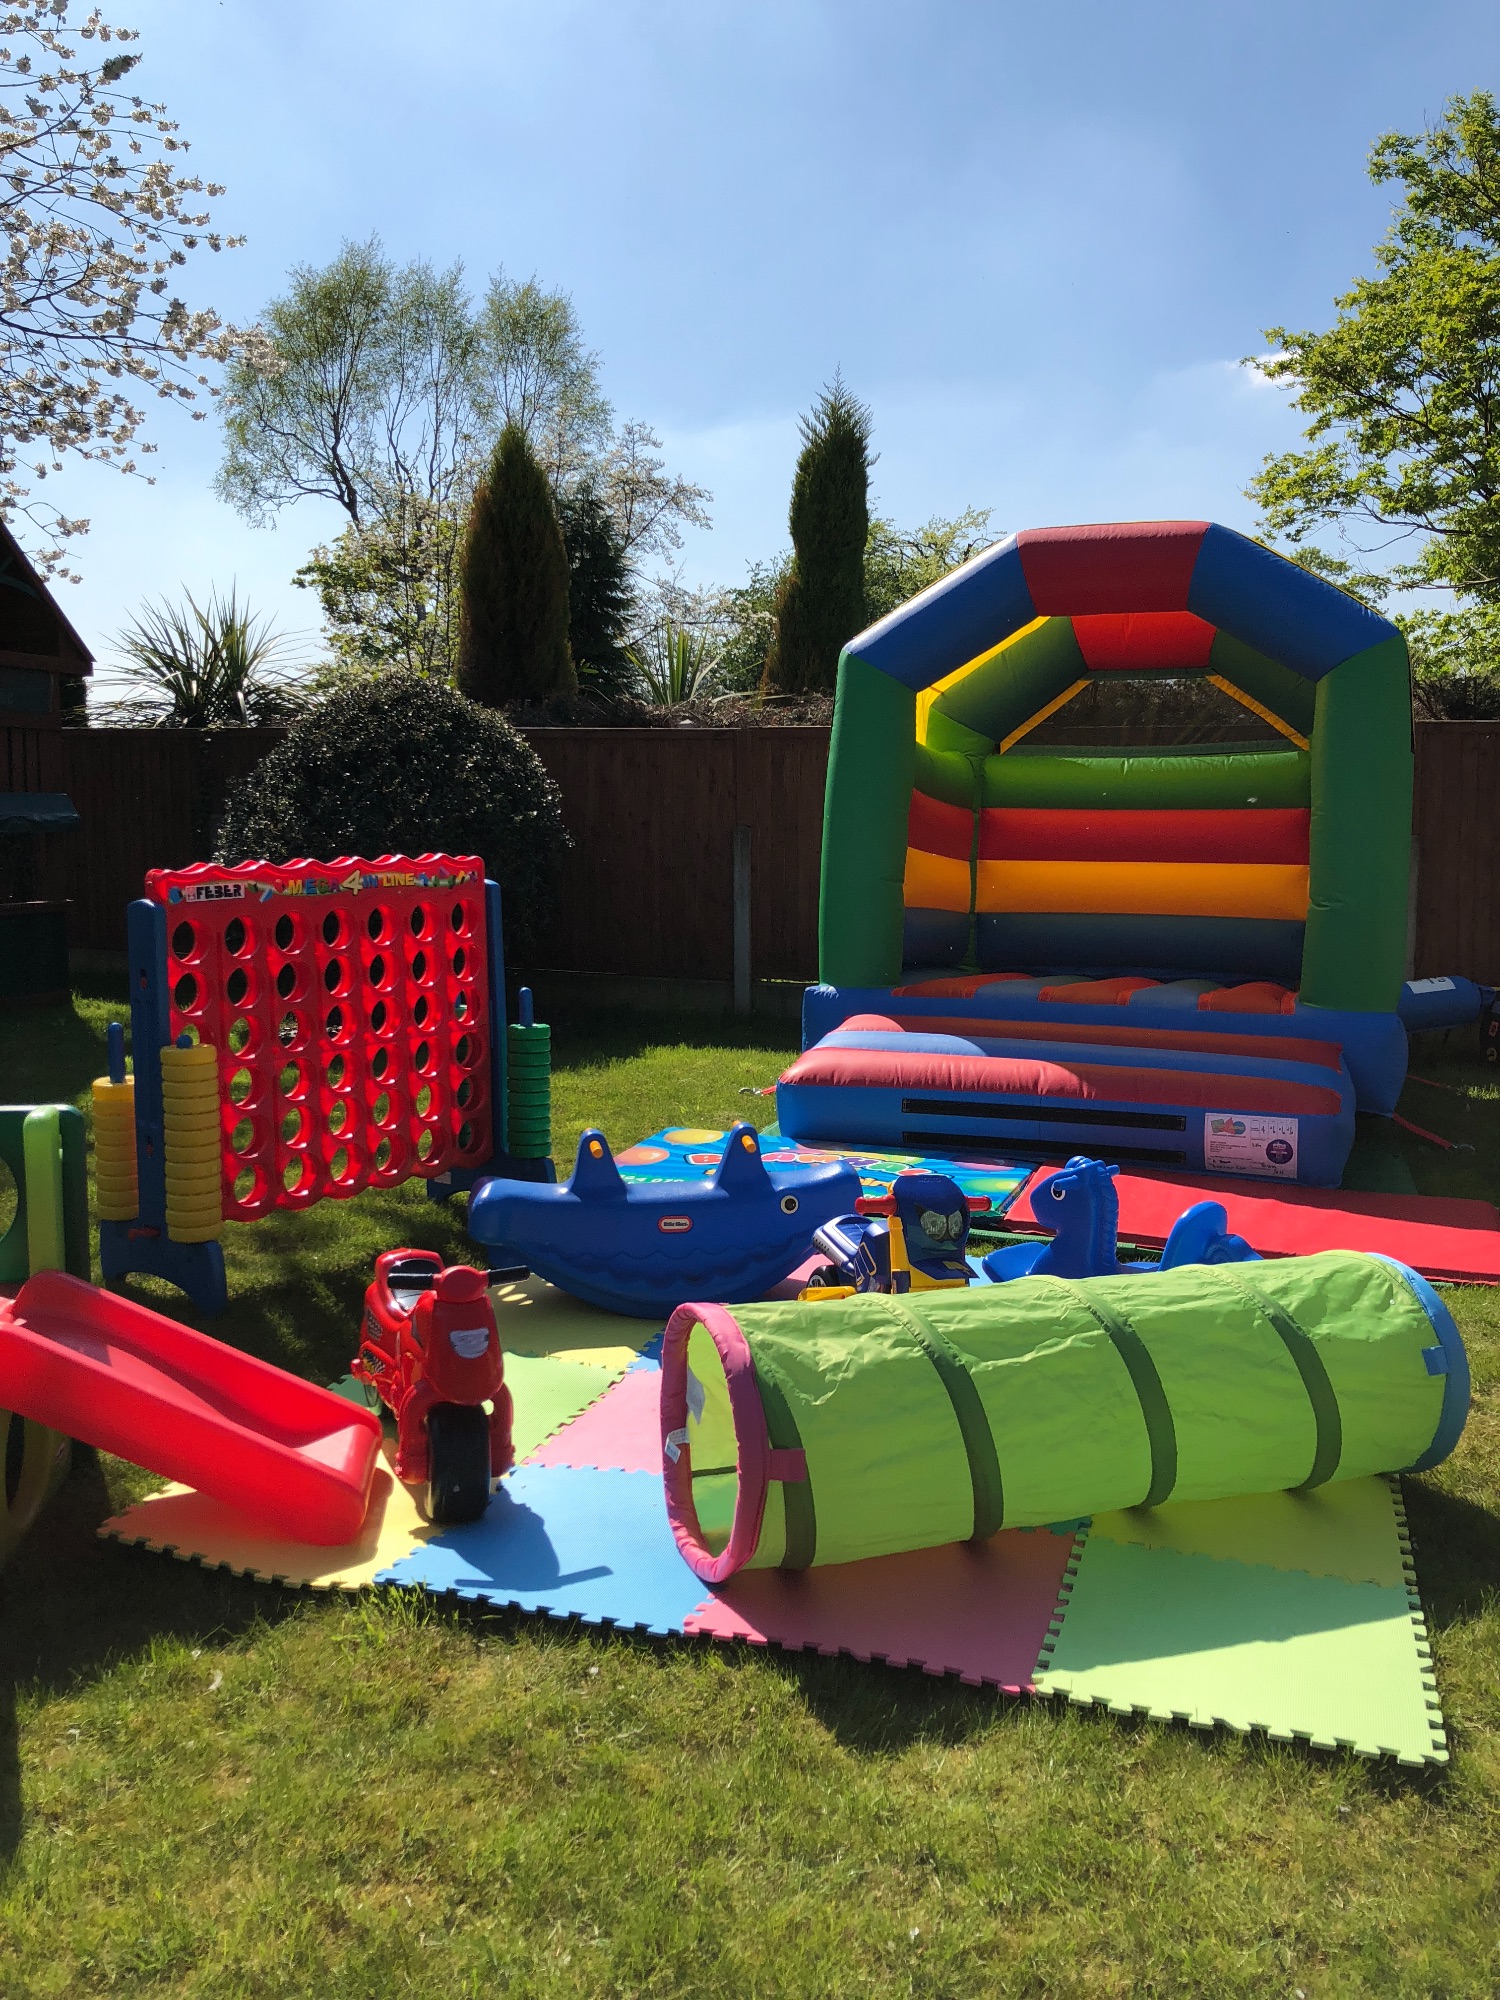 bramhall soft play hire - affordable soft play and pre school bouncy castle